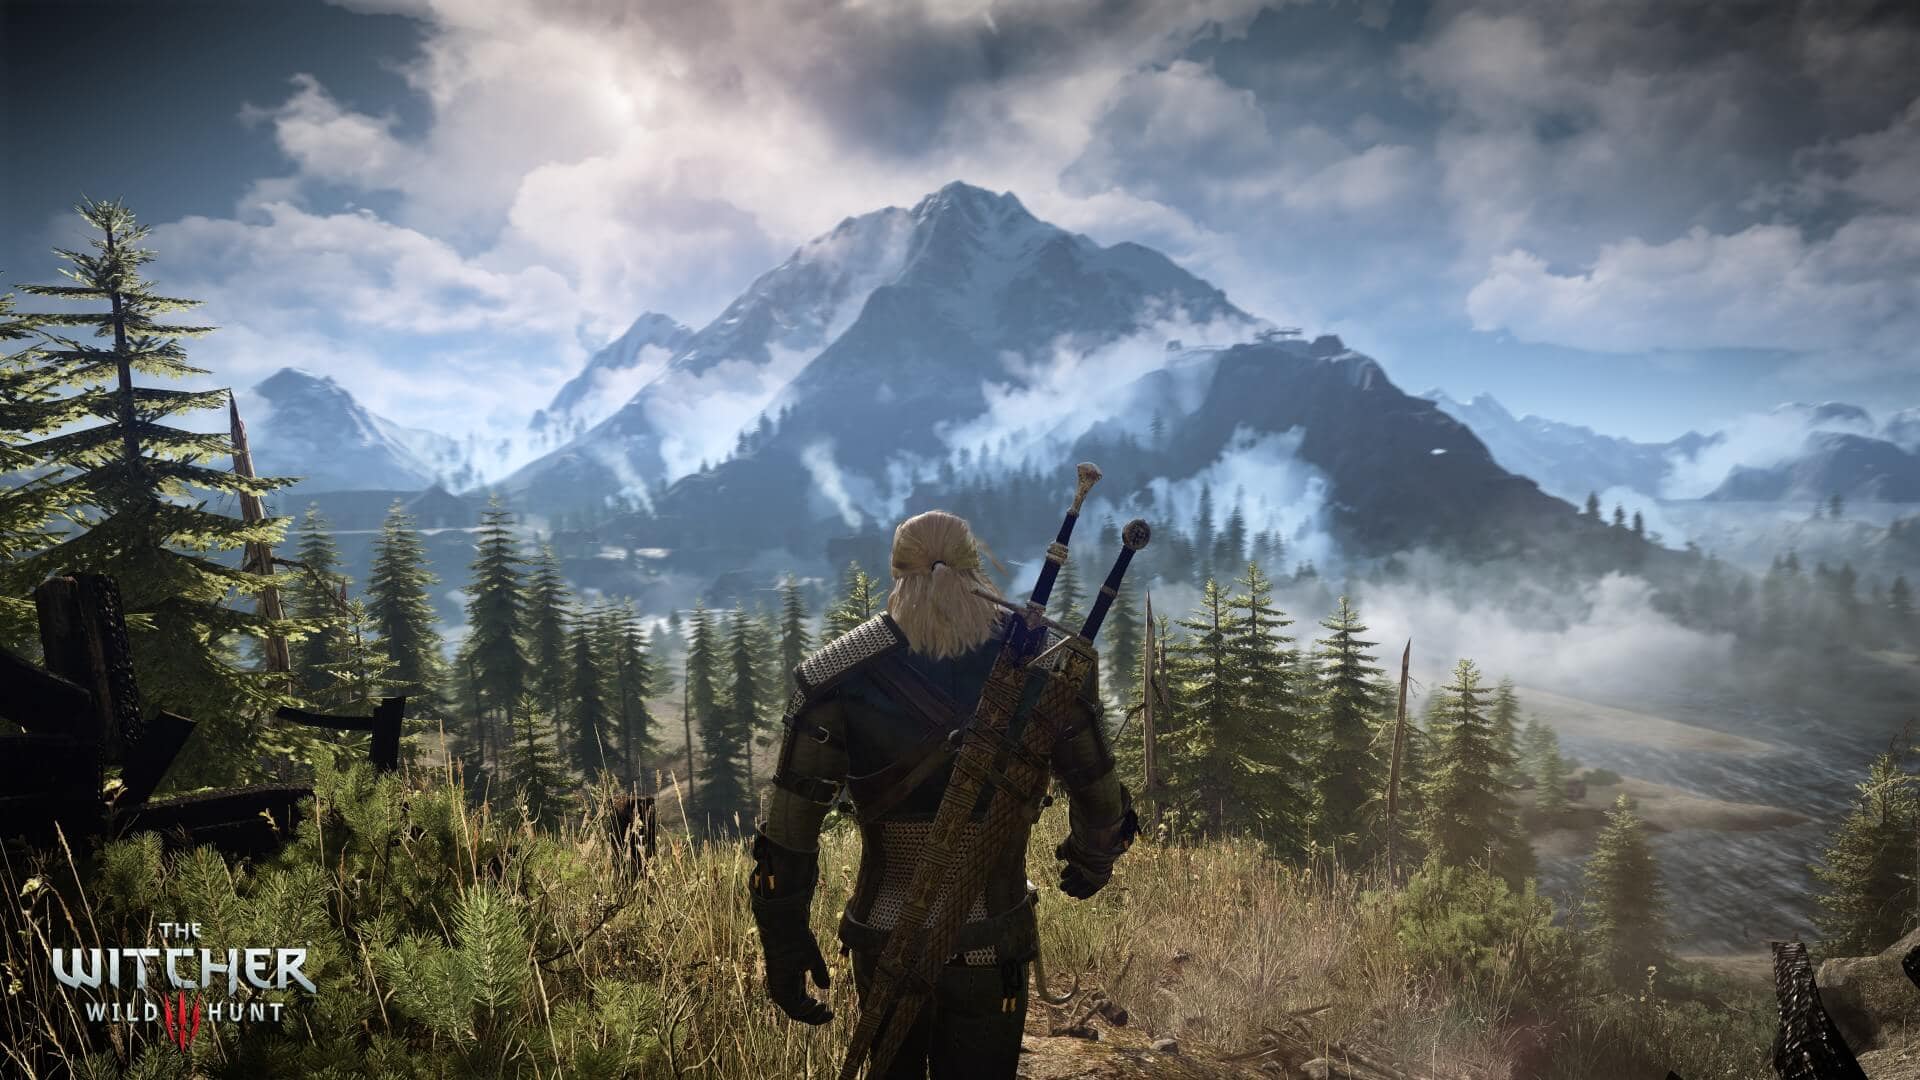 The Witcher 3: Wild Hunt Forest Environment Screenshot